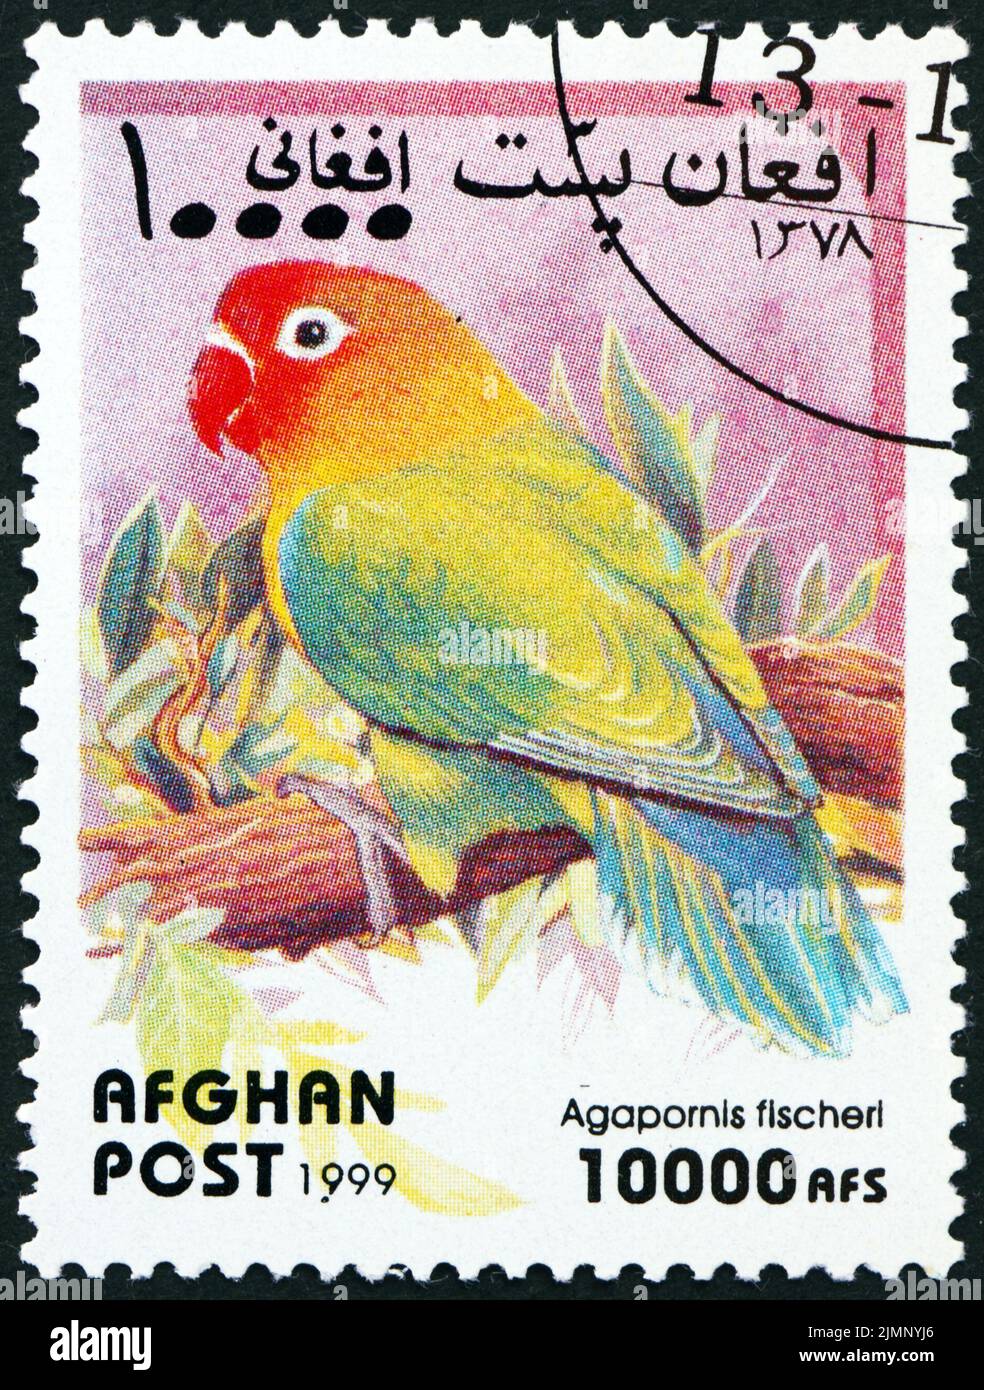 AFGHANISTAN - CIRCA 1999: a stamp printed in Afghanistan shows Fishers lovebird, agapornis fischeri, is a species of bird of the lovebird genus in the Stock Photo